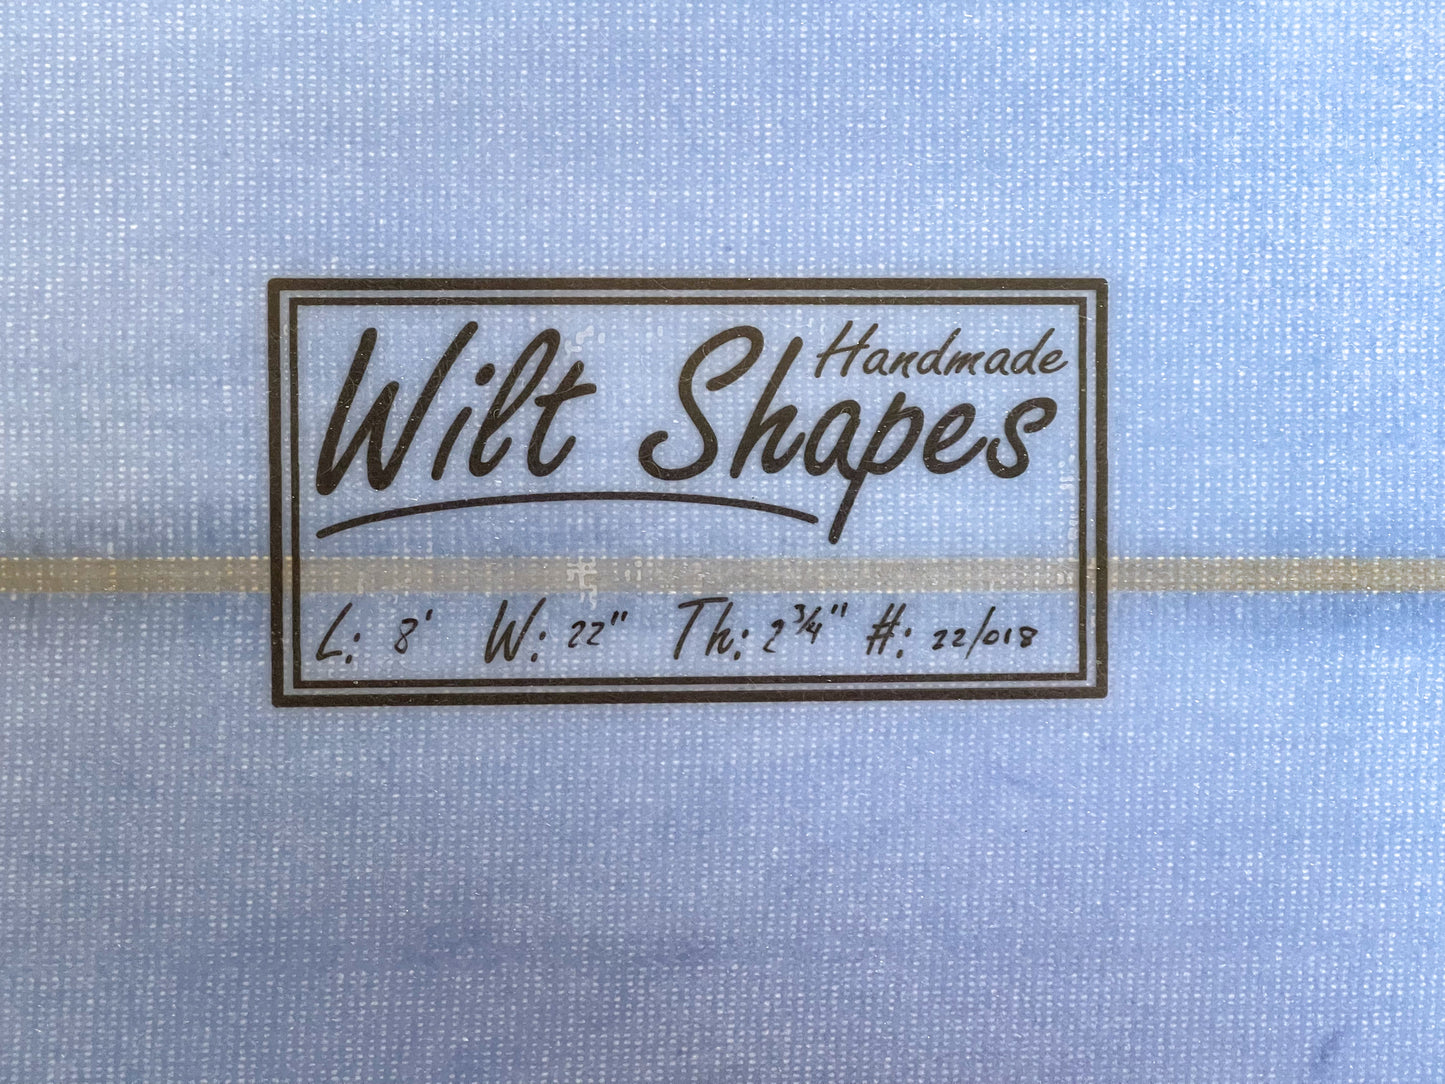 8' Pin tail surfboard - Wilt Shapes